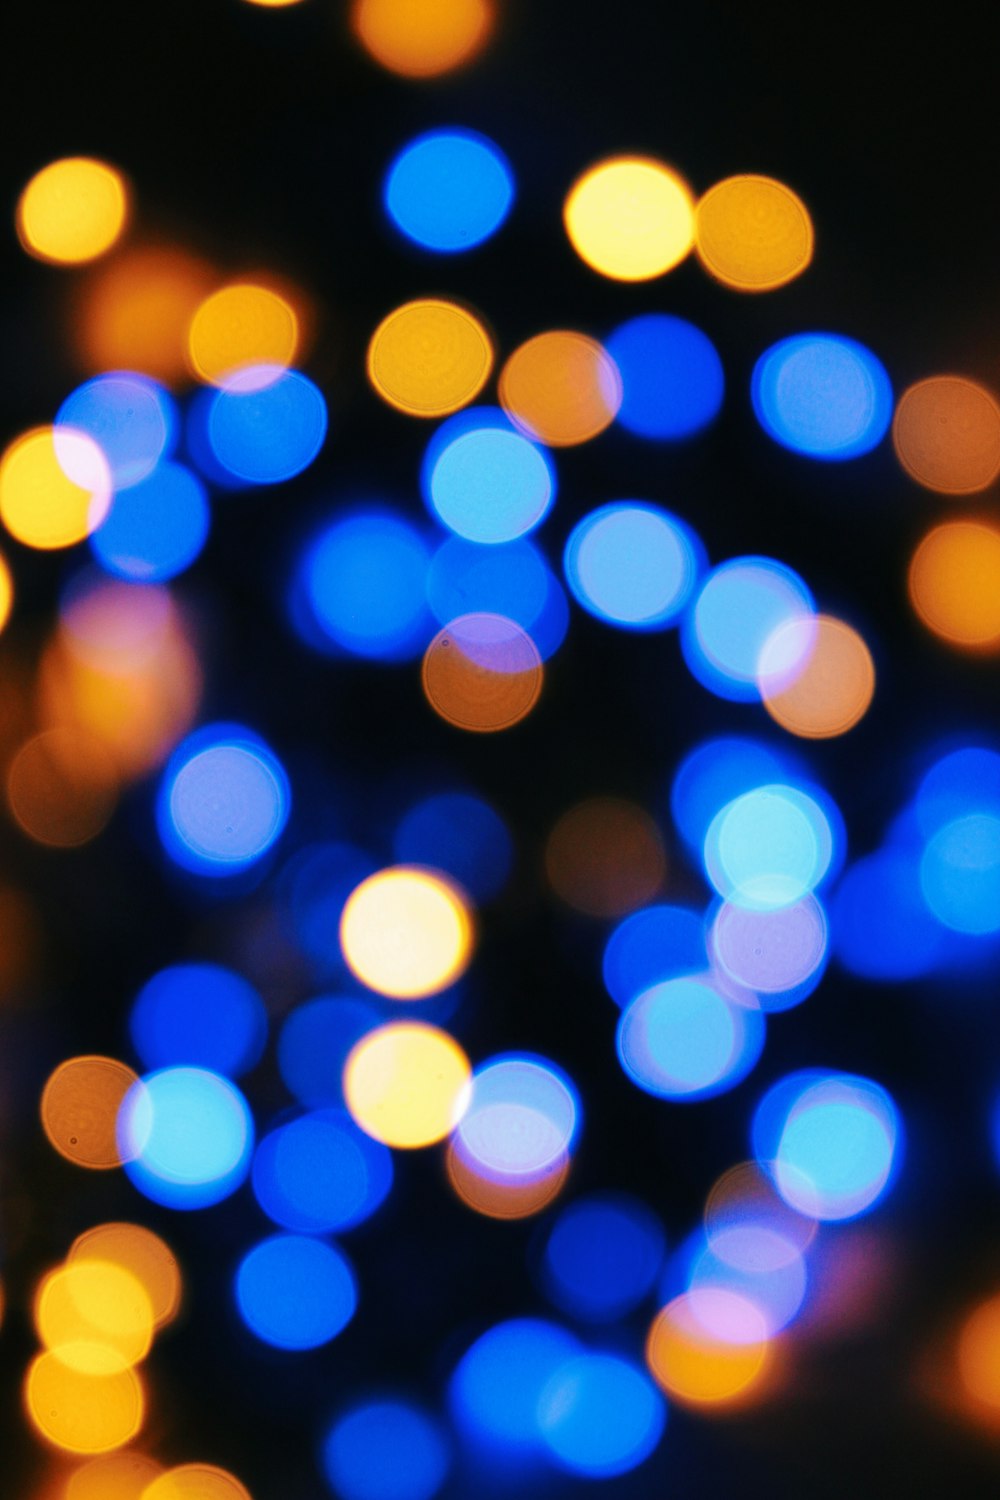 500 Stunning Bokeh Pictures Hd Download Free Images Stock Photos On Unsplash